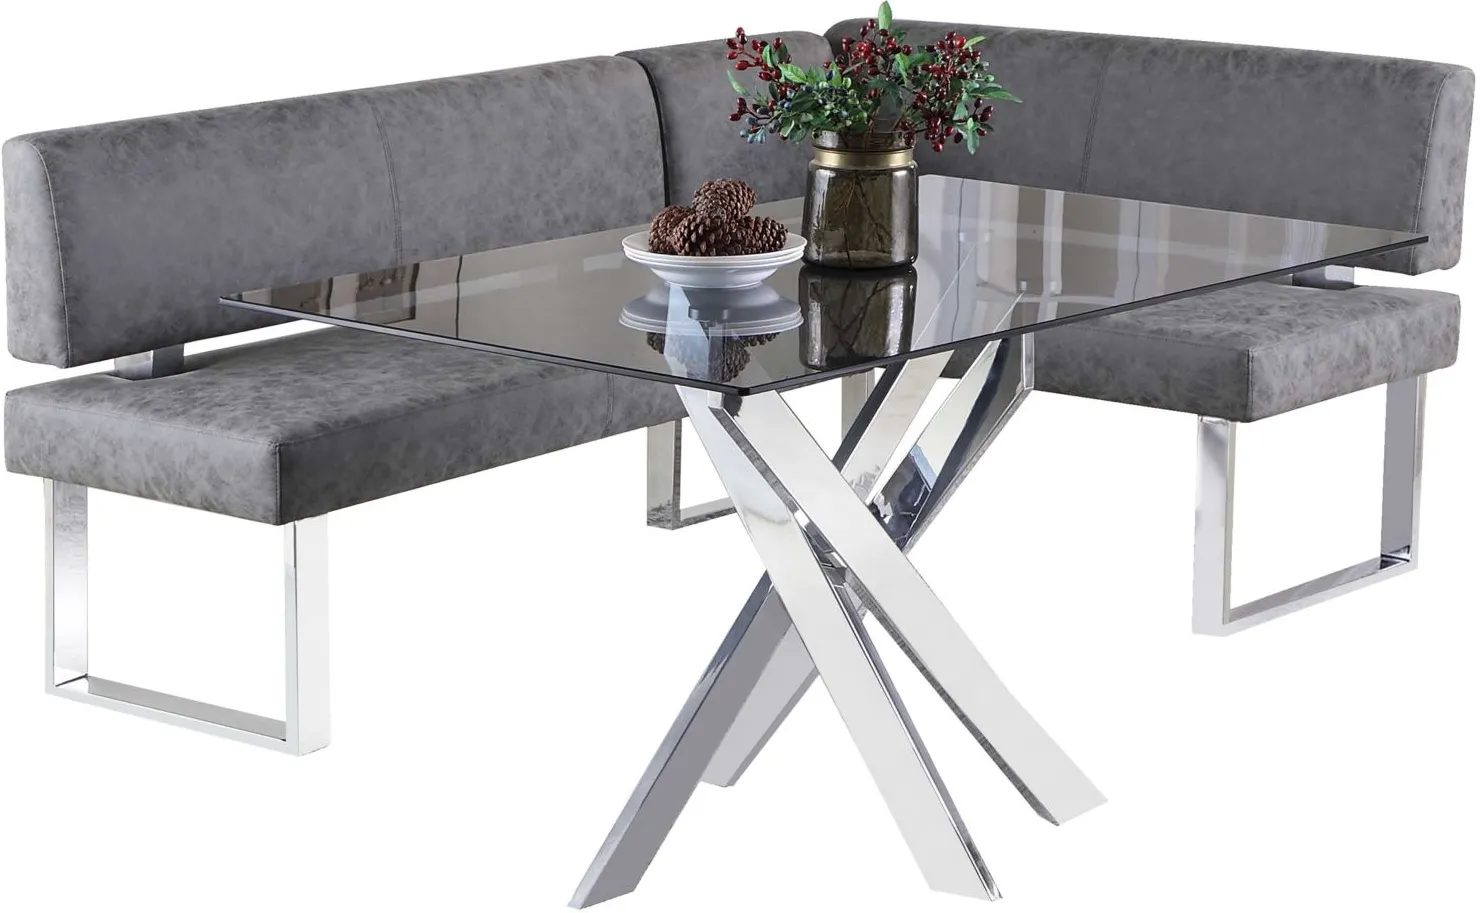 Guinevieve 2-pc. Dining Set in Gray by Chintaly Imports